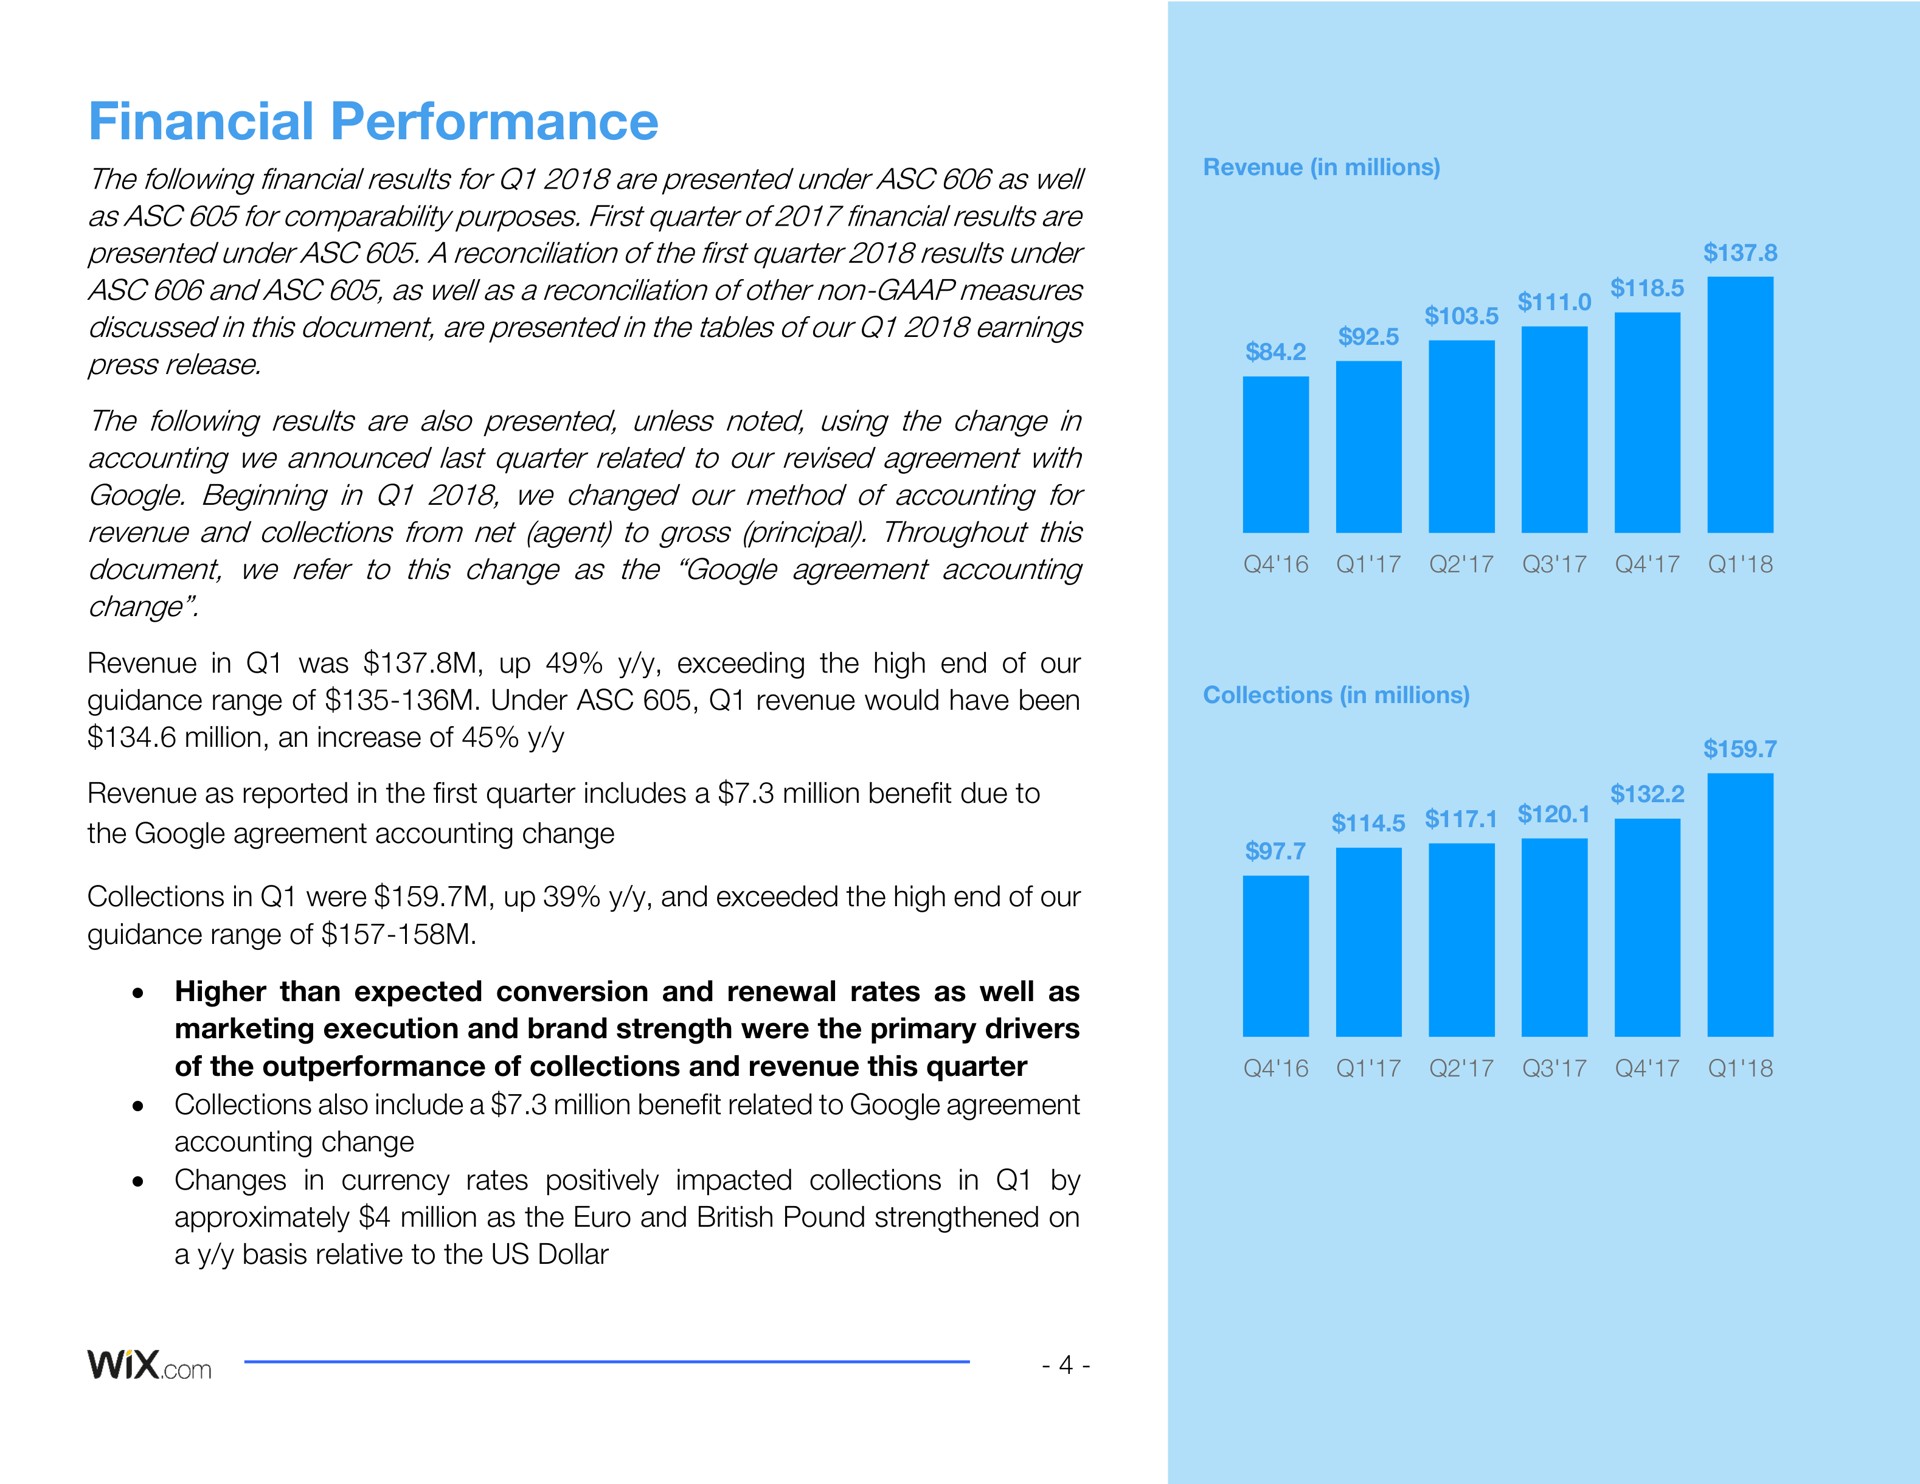 financial performance the following financial results for are presented under as well as for comparability purposes first quarter of financial results are presented under a reconciliation of the first quarter results under and as well as a reconciliation of other non measures discussed in this document are presented in the tables of our earnings press release the following results are also presented unless noted using the change in accounting we announced last quarter related to our revised agreement with beginning in we changed our method of accounting for revenue and collections from net agent to gross principal throughout this document we refer to this change as the agreement accounting change revenue in was up exceeding the high end of our guidance range of under revenue would have been million an increase of revenue as reported in the first quarter includes a million benefit due to the agreement accounting change collections in were up and exceeded the high end of our guidance range of higher than expected conversion and renewal rates as well as marketing execution and brand strength were the primary drivers of the of collections and revenue this quarter collections also include a million benefit related to agreement accounting change changes in currency rates positively impacted collections in by approximately million as the and pound strengthened on a basis relative to the us dollar i i | Wix